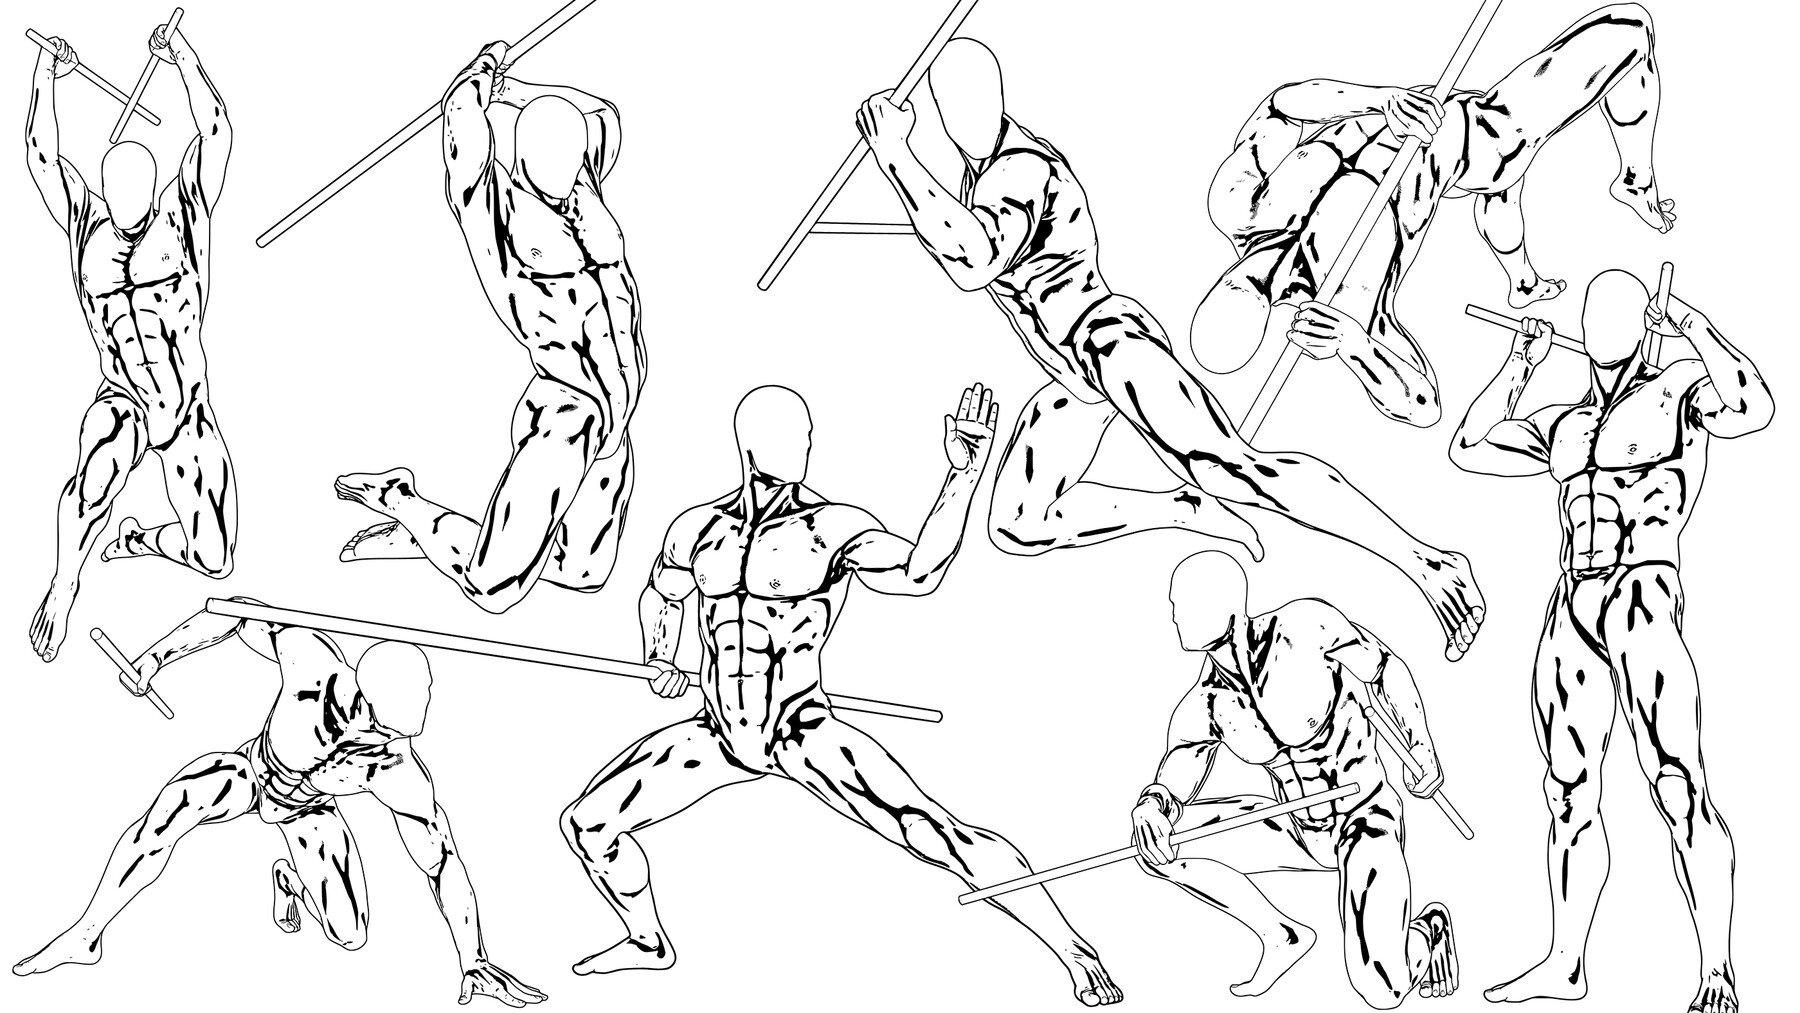 How to Draw a Manga Girl Fighting Pose  DrawingNow